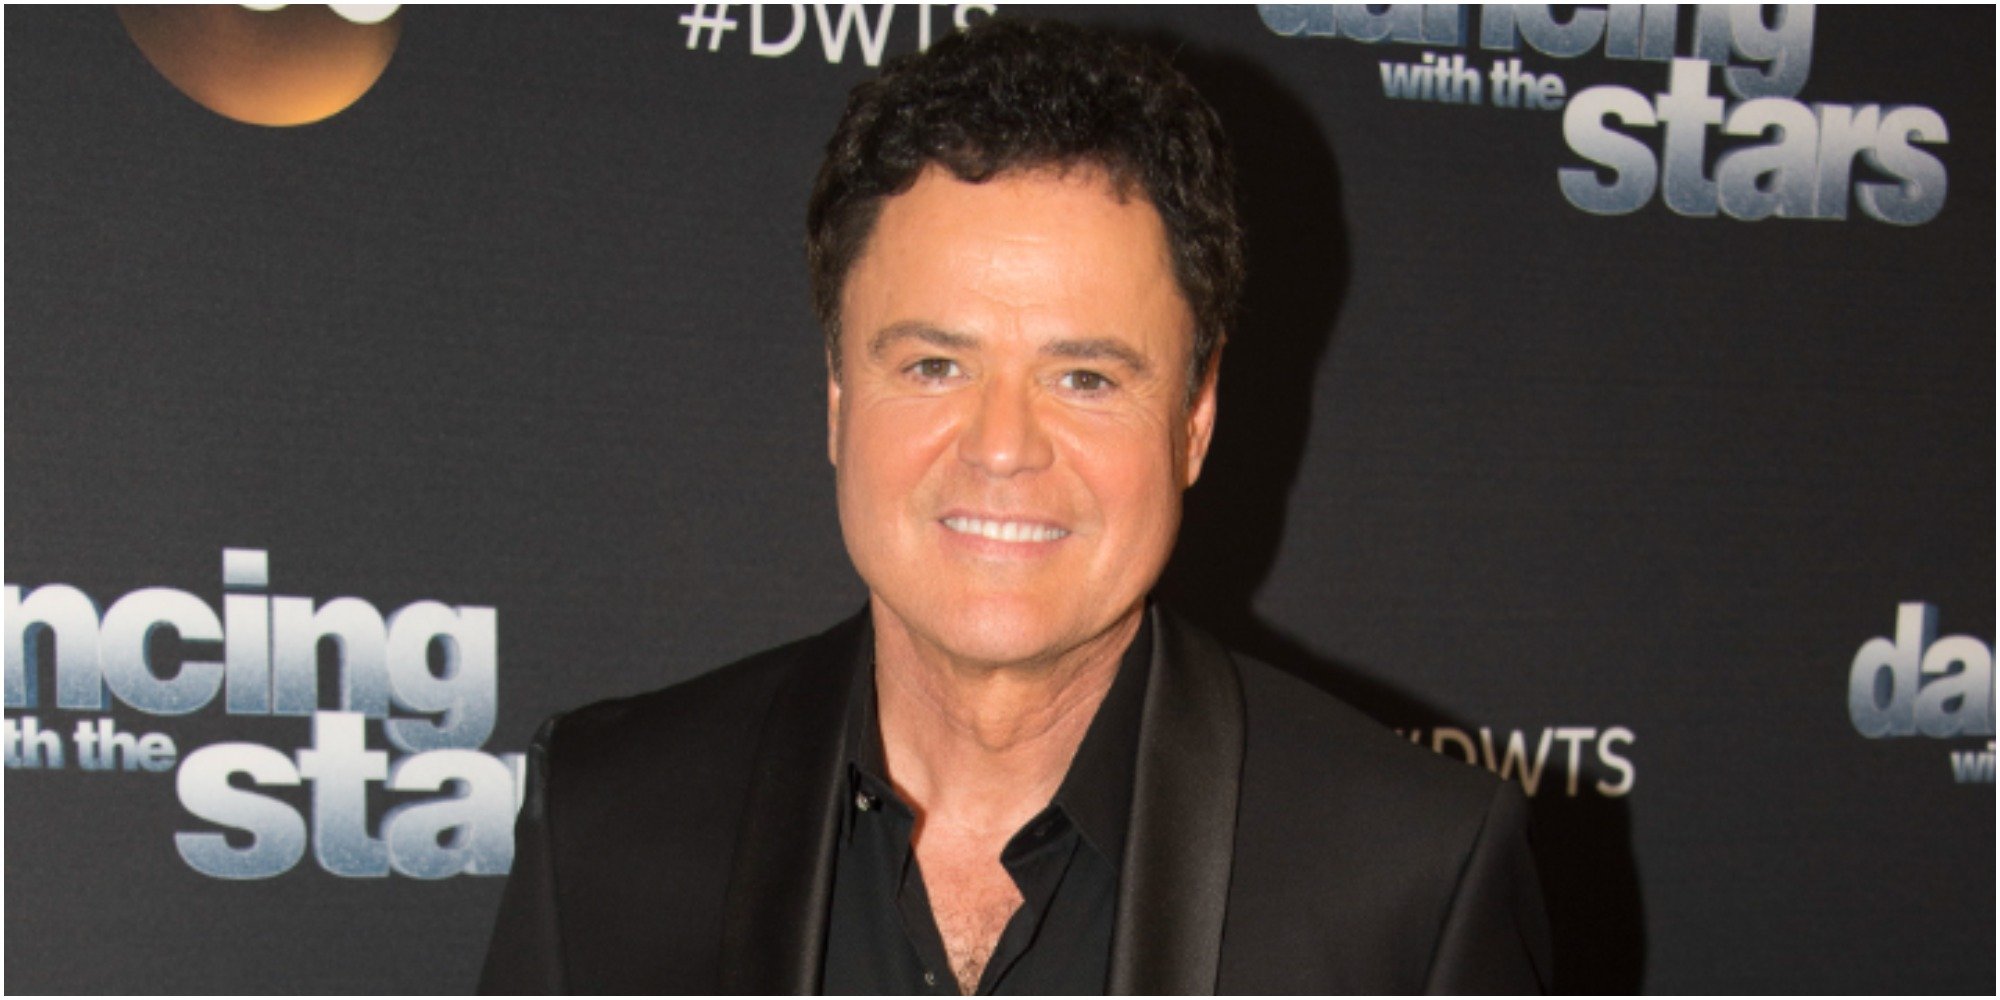 Donny Osmond showed off his "Dancing With the Stars" moves backstage in Las Vegas.